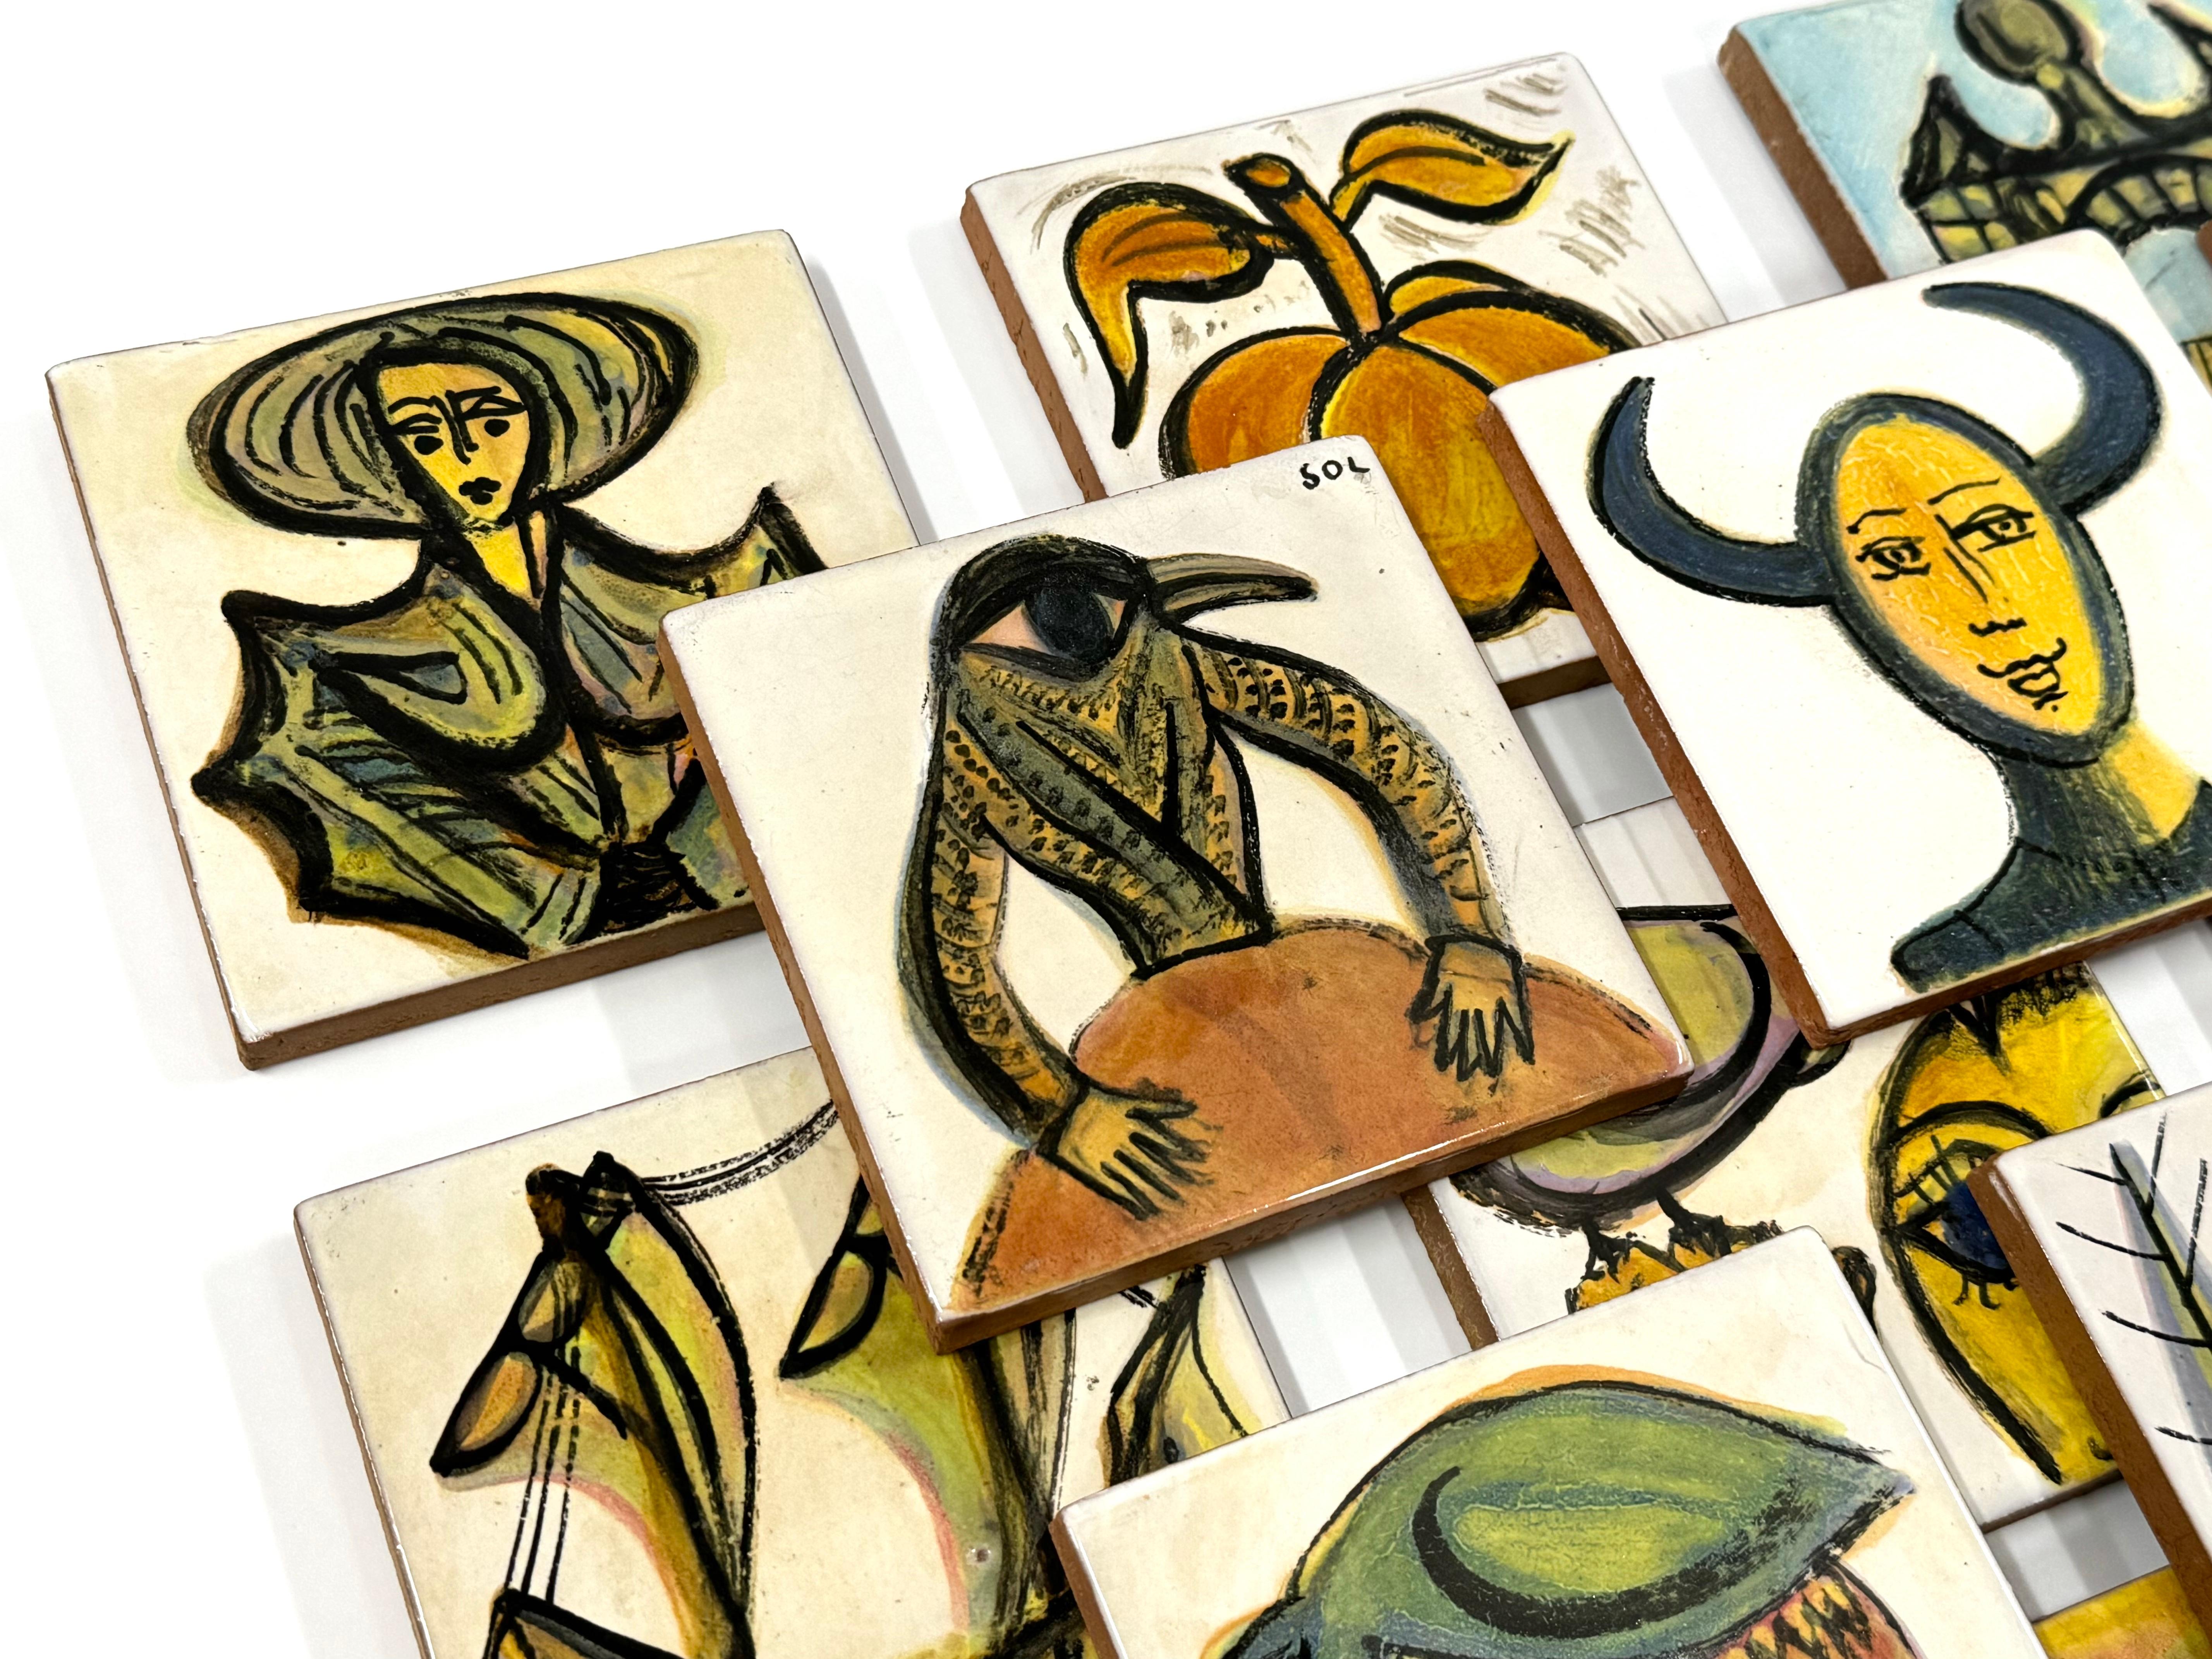 Set of eighteen original hand painted Greek art pottery tiles, circa 1970.

Tiles are abstract in style and feature surrealist figures, faces and mythological characters.  Tiles are constructed of red clay, each being hand painted and glazed.

The